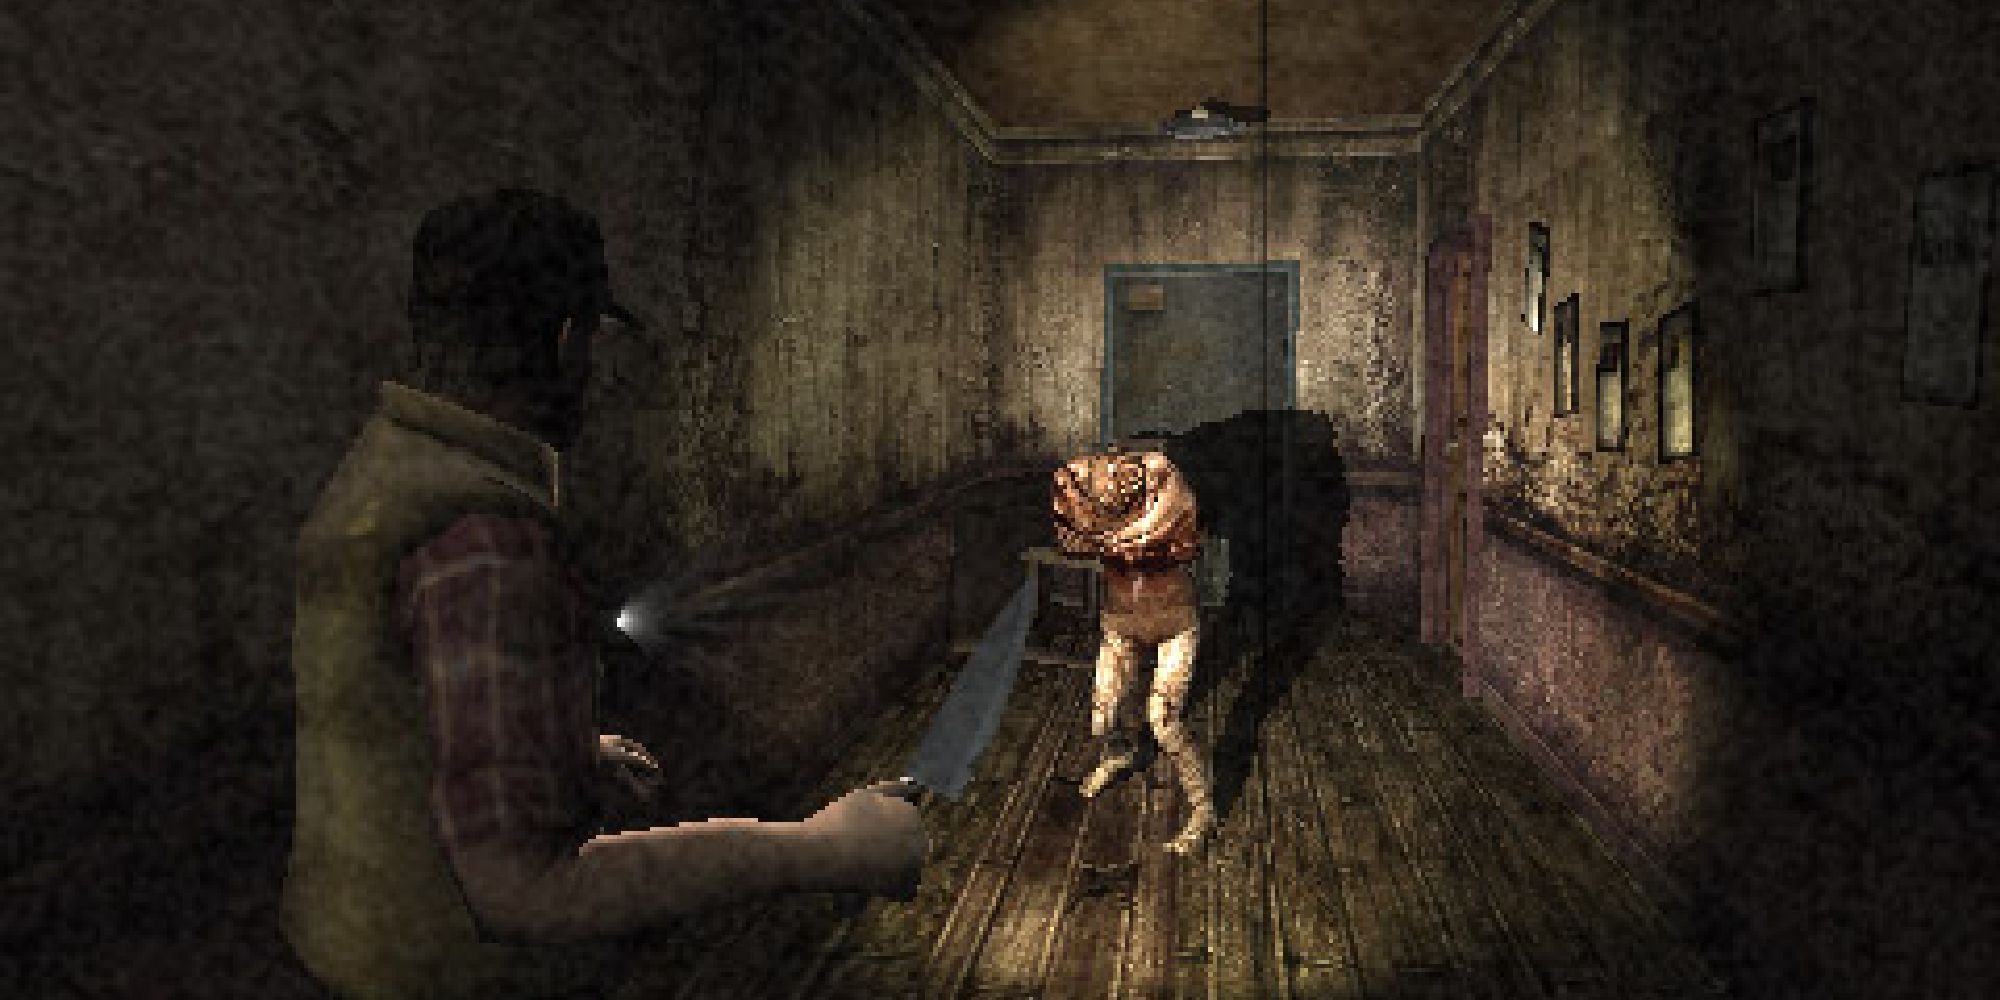 A humanoid creature shambles towards the protagonist brandishing a knife in preparation. 